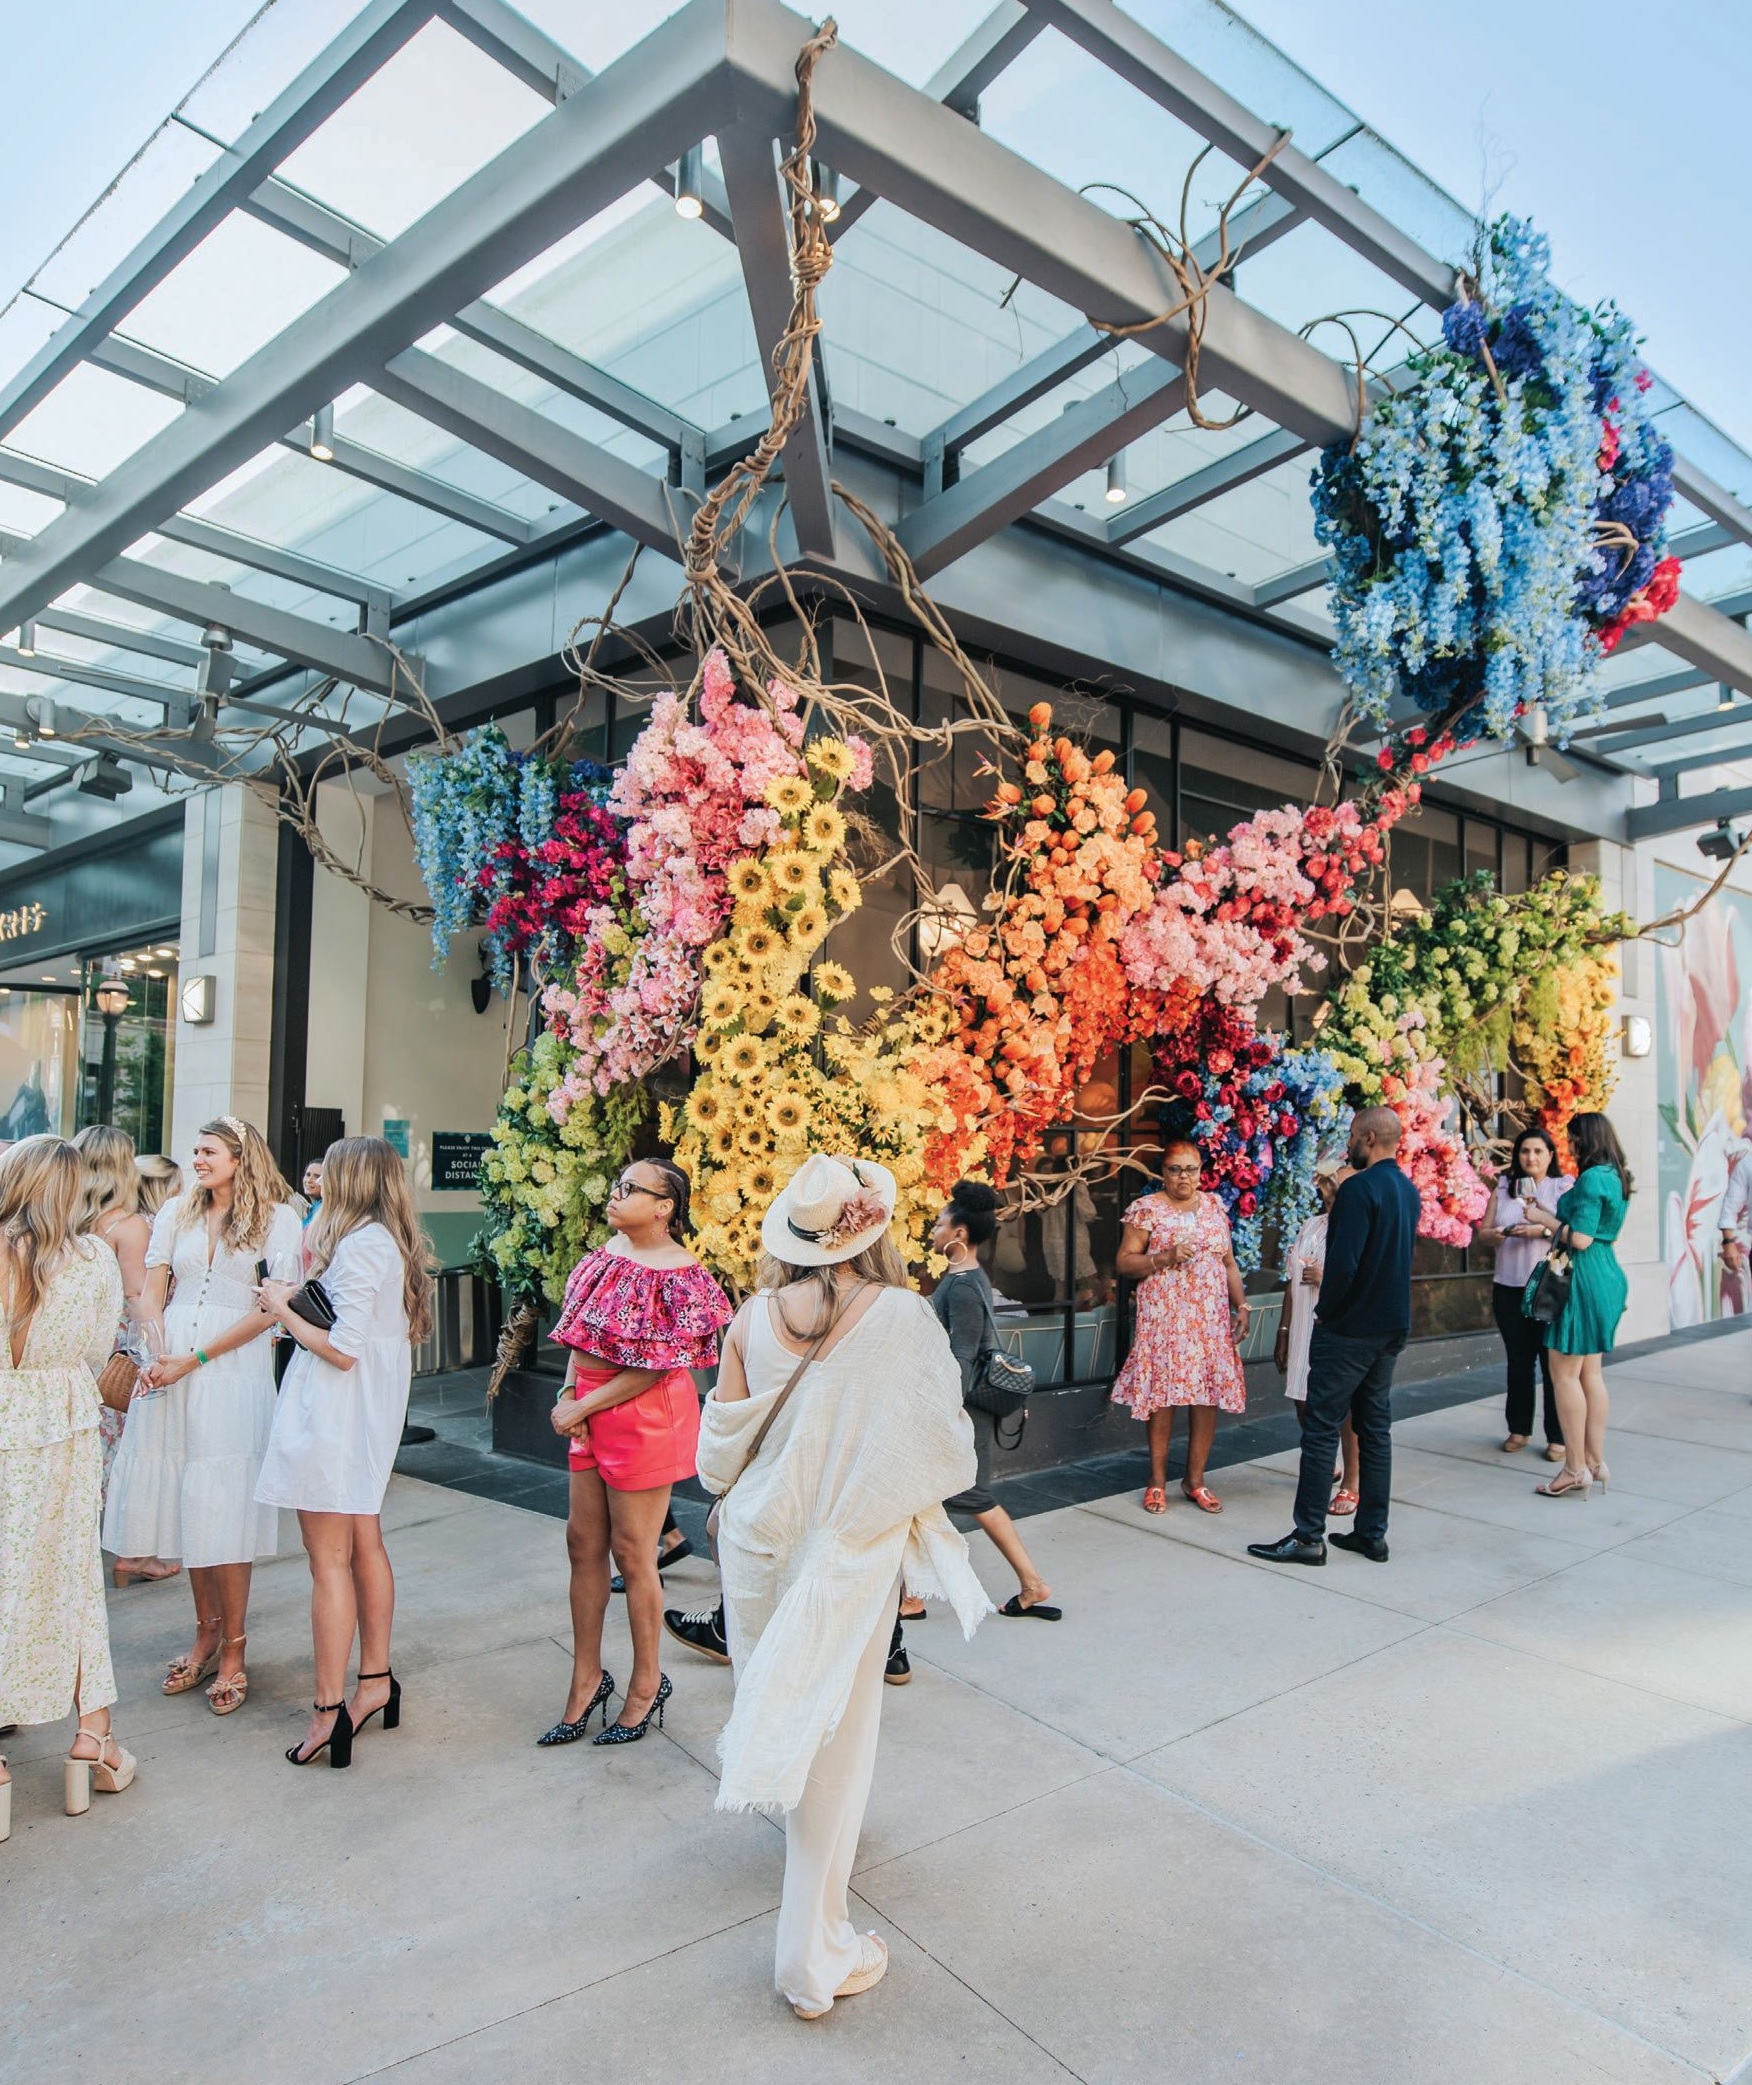 Bodacious Blooms Flower Festival at Buckhead Village in April. PHOTO COURTESY OF JAMESTOWN